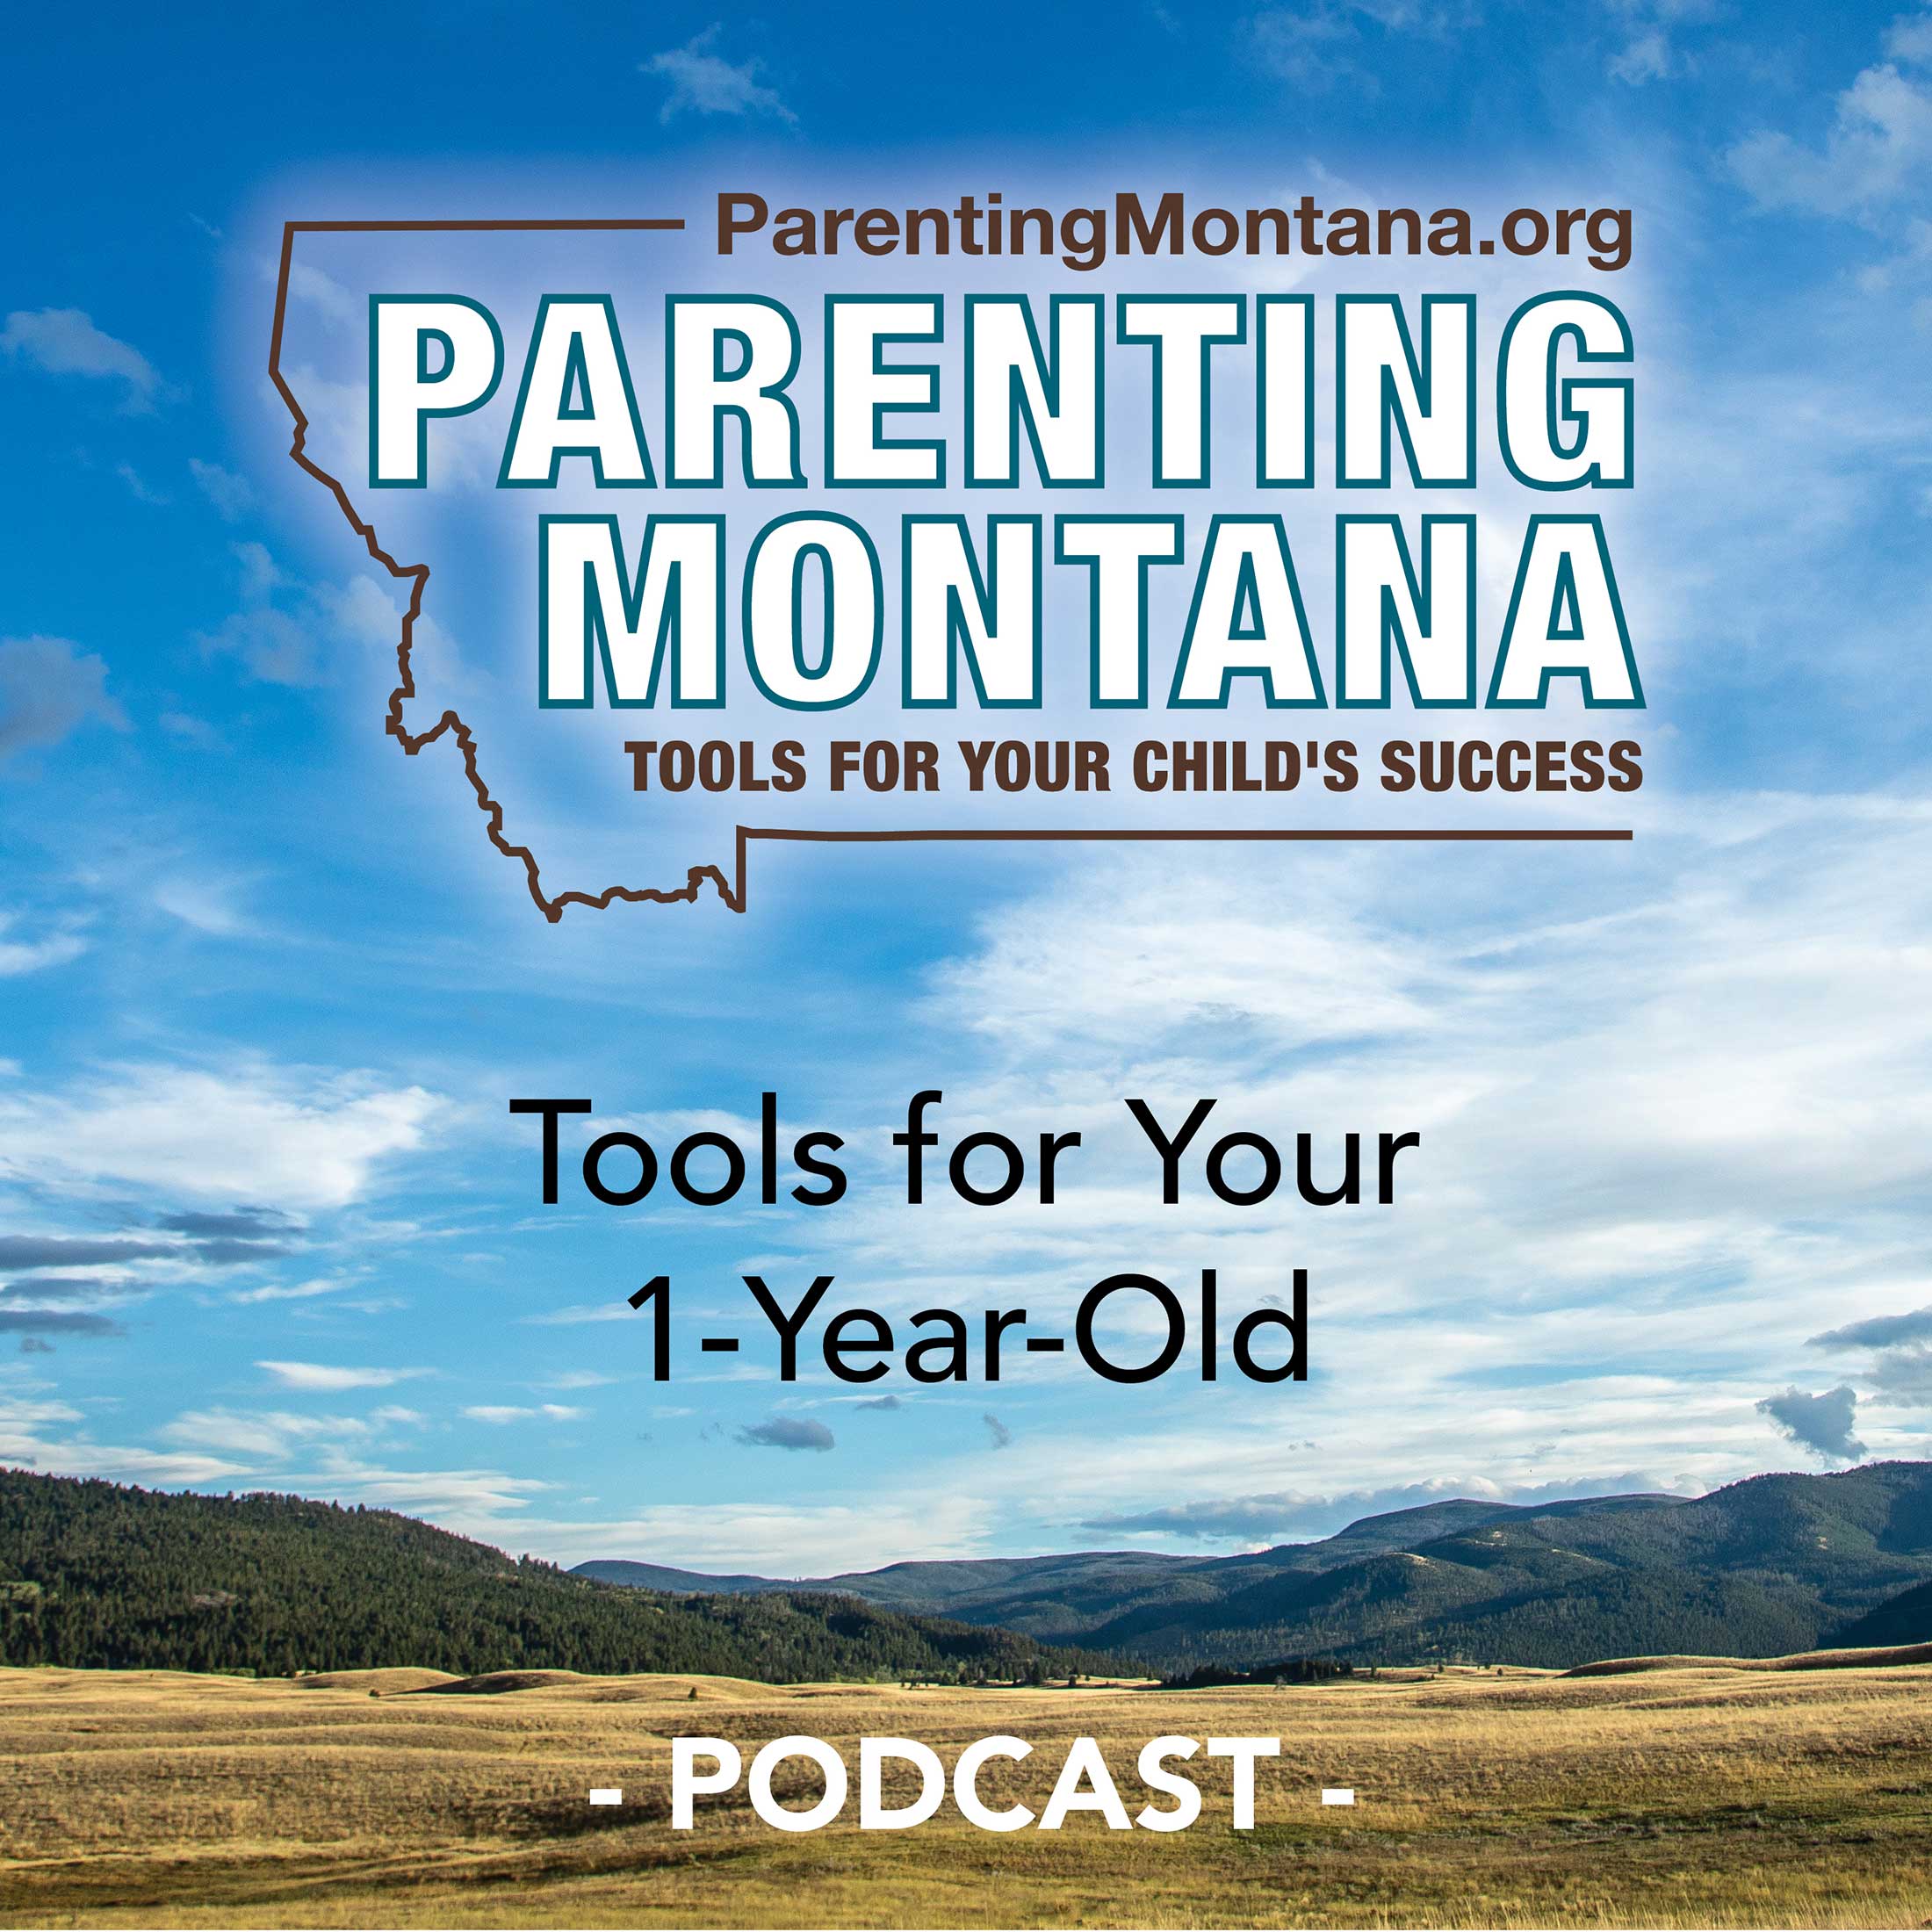 Artwork for podcast 1-Year-Old Parenting Montana Tools